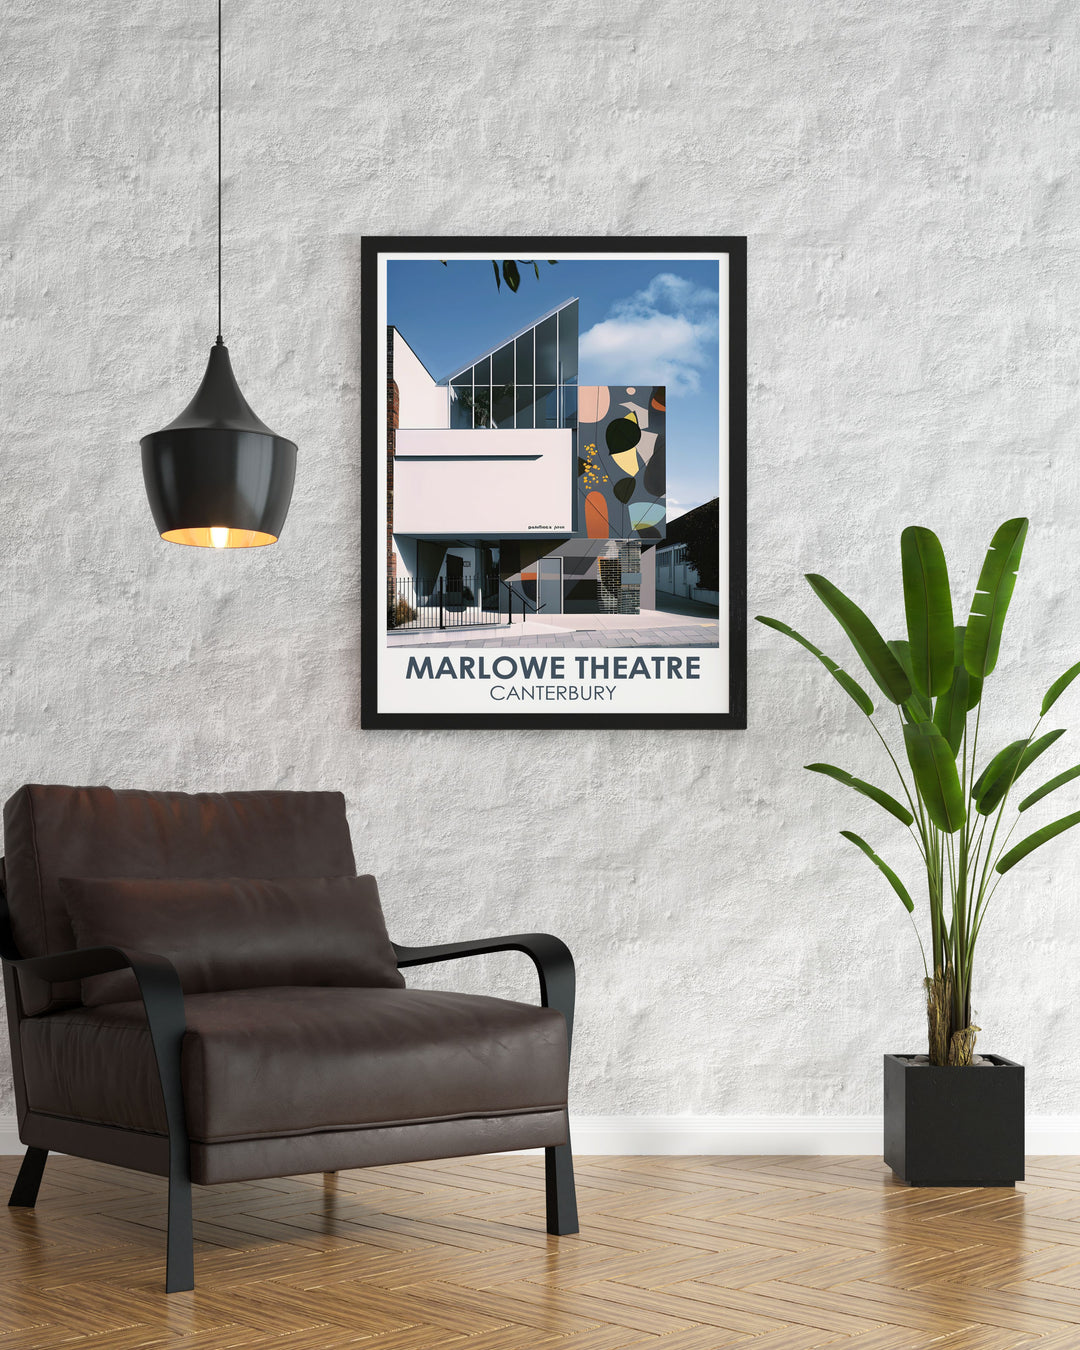 Capture the essence of Canterbury with this stunning poster of the Marlowe Theatre, highlighting its architectural splendor and cultural significance, perfect for adding a vibrant and artistic touch to any room in your home.